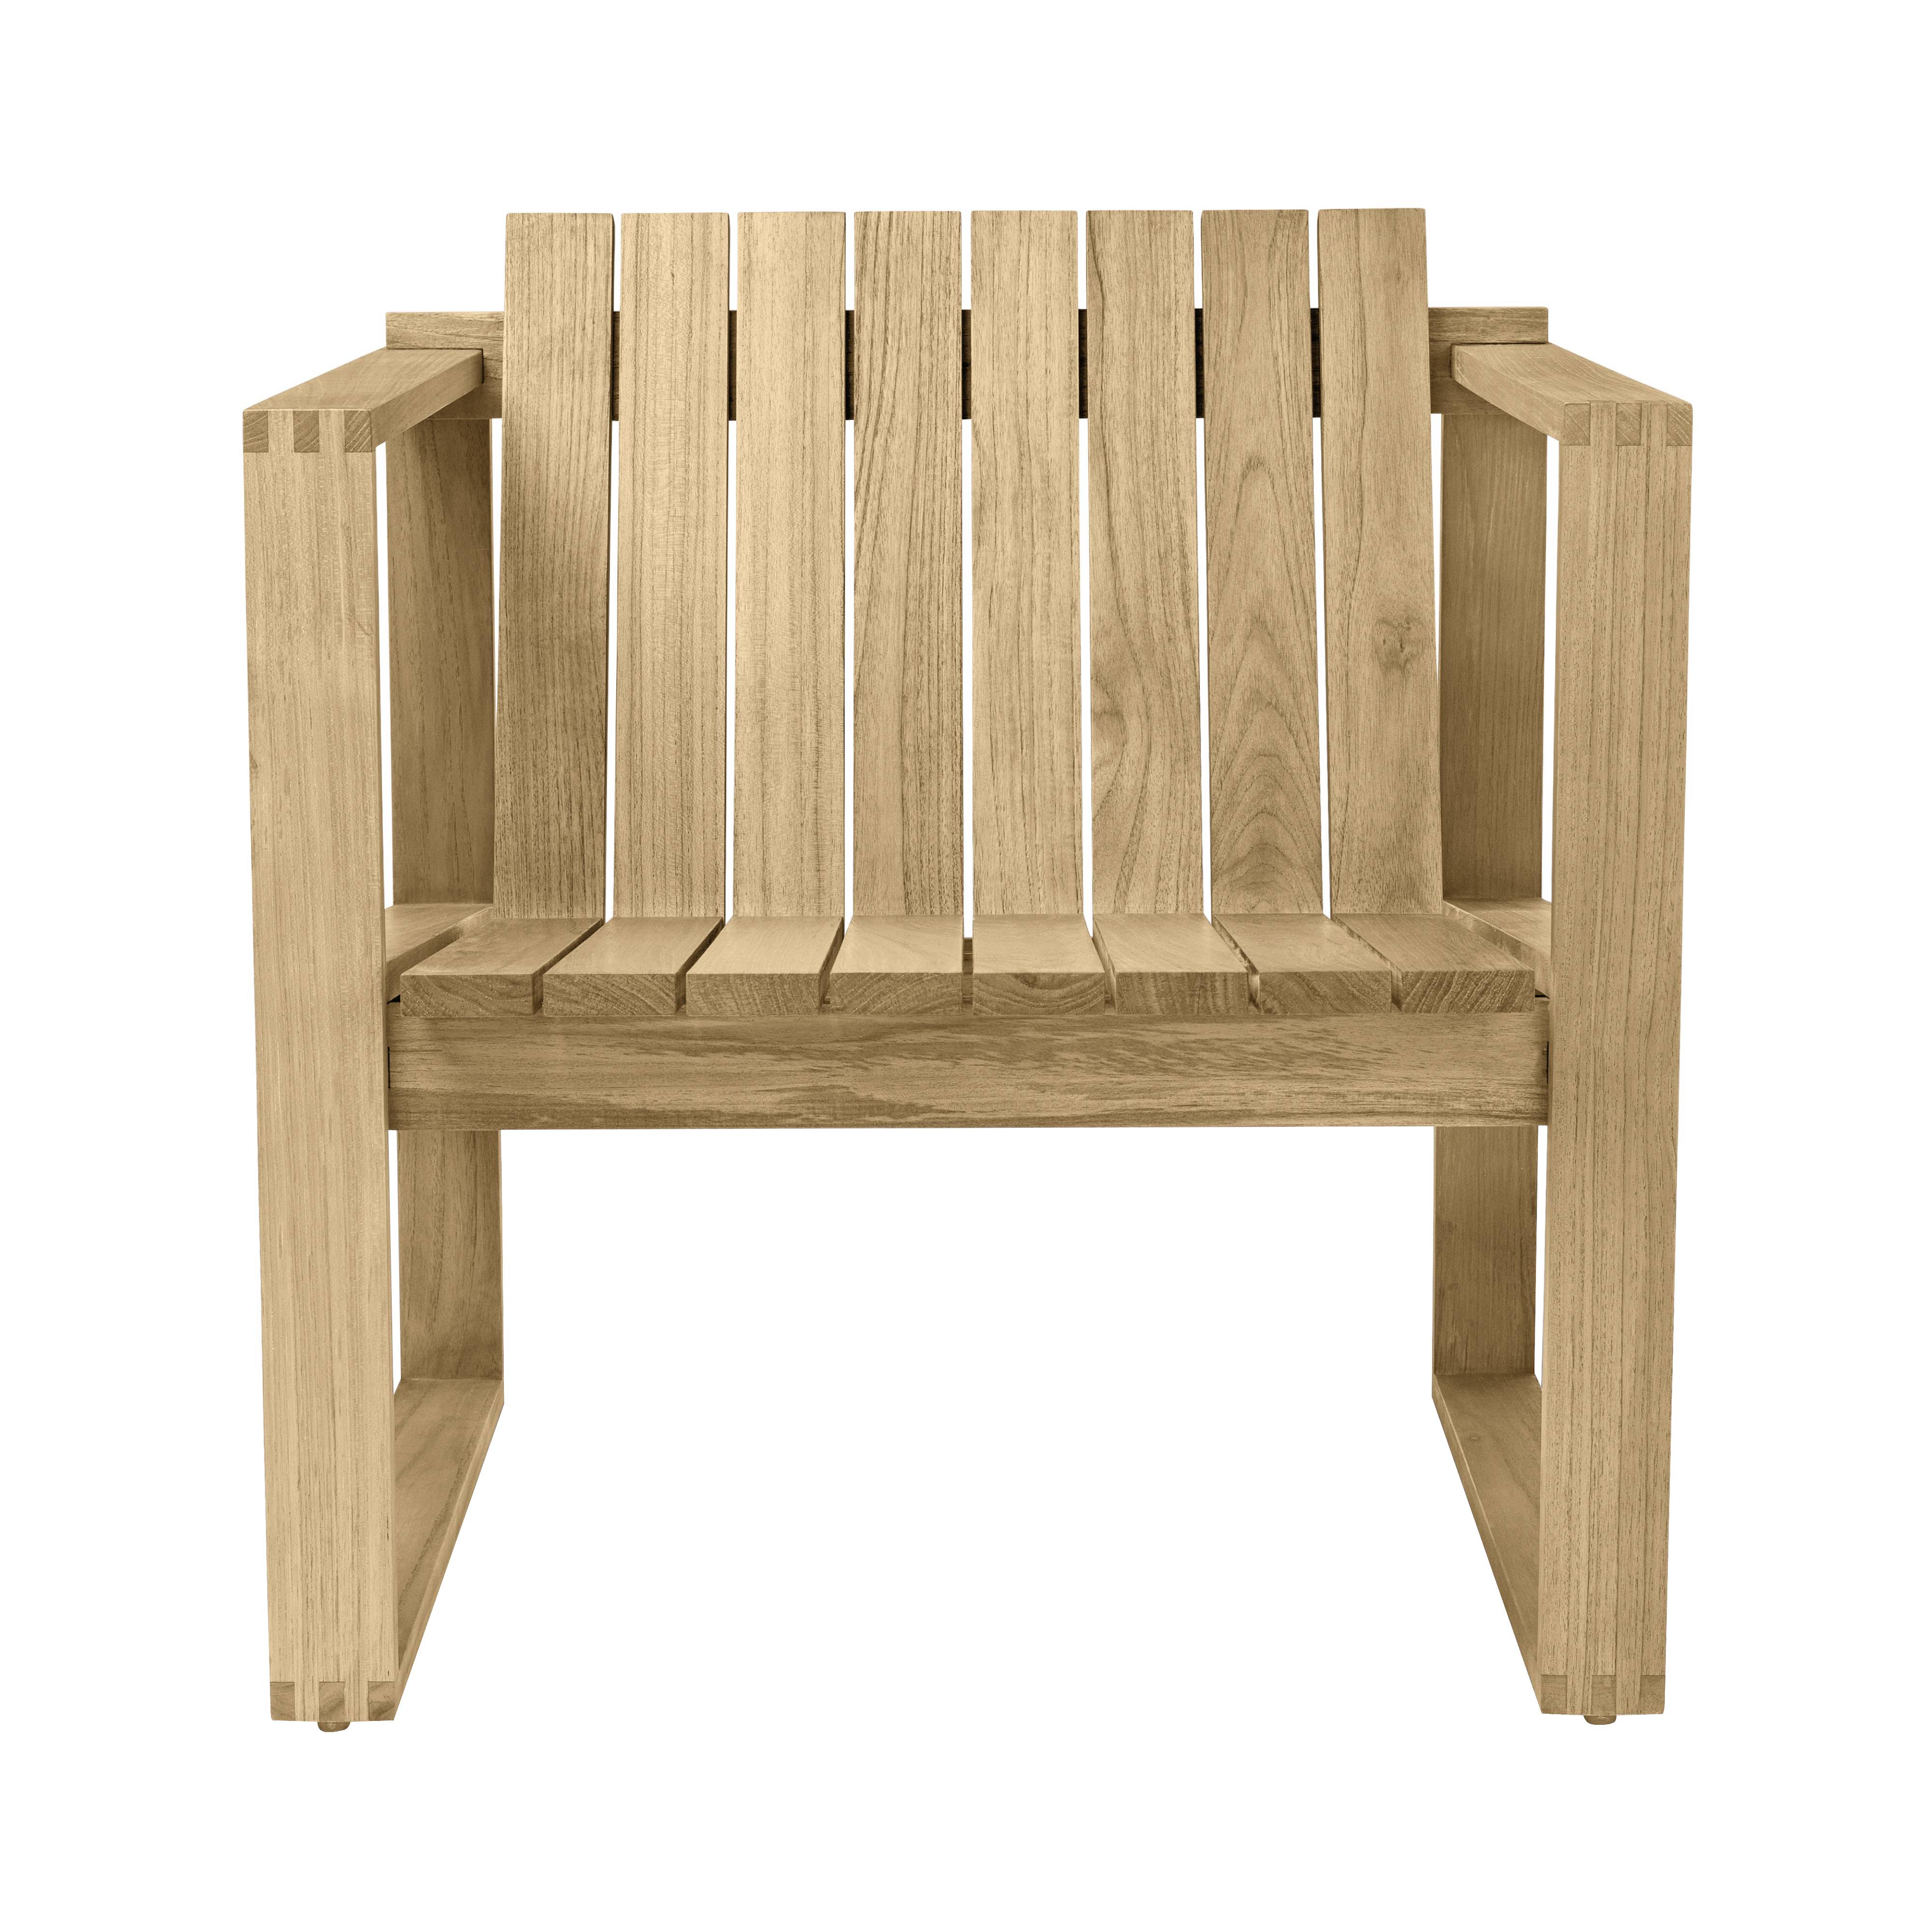 BK11 Outdoor Lounge Chair: Without Cushion